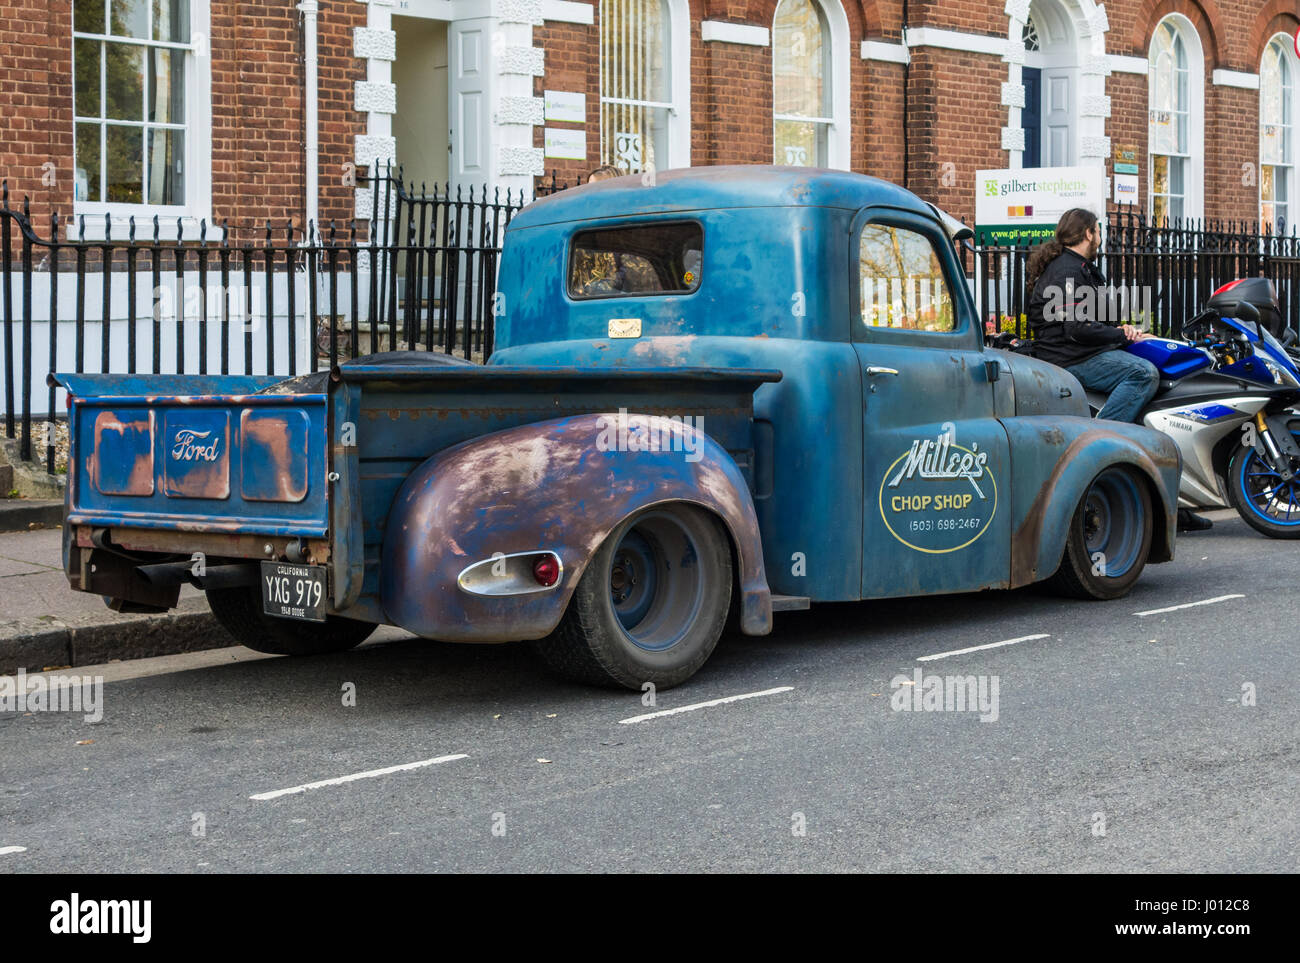 An old style truck in the genre of 1950s American vehicles. Stock Photo